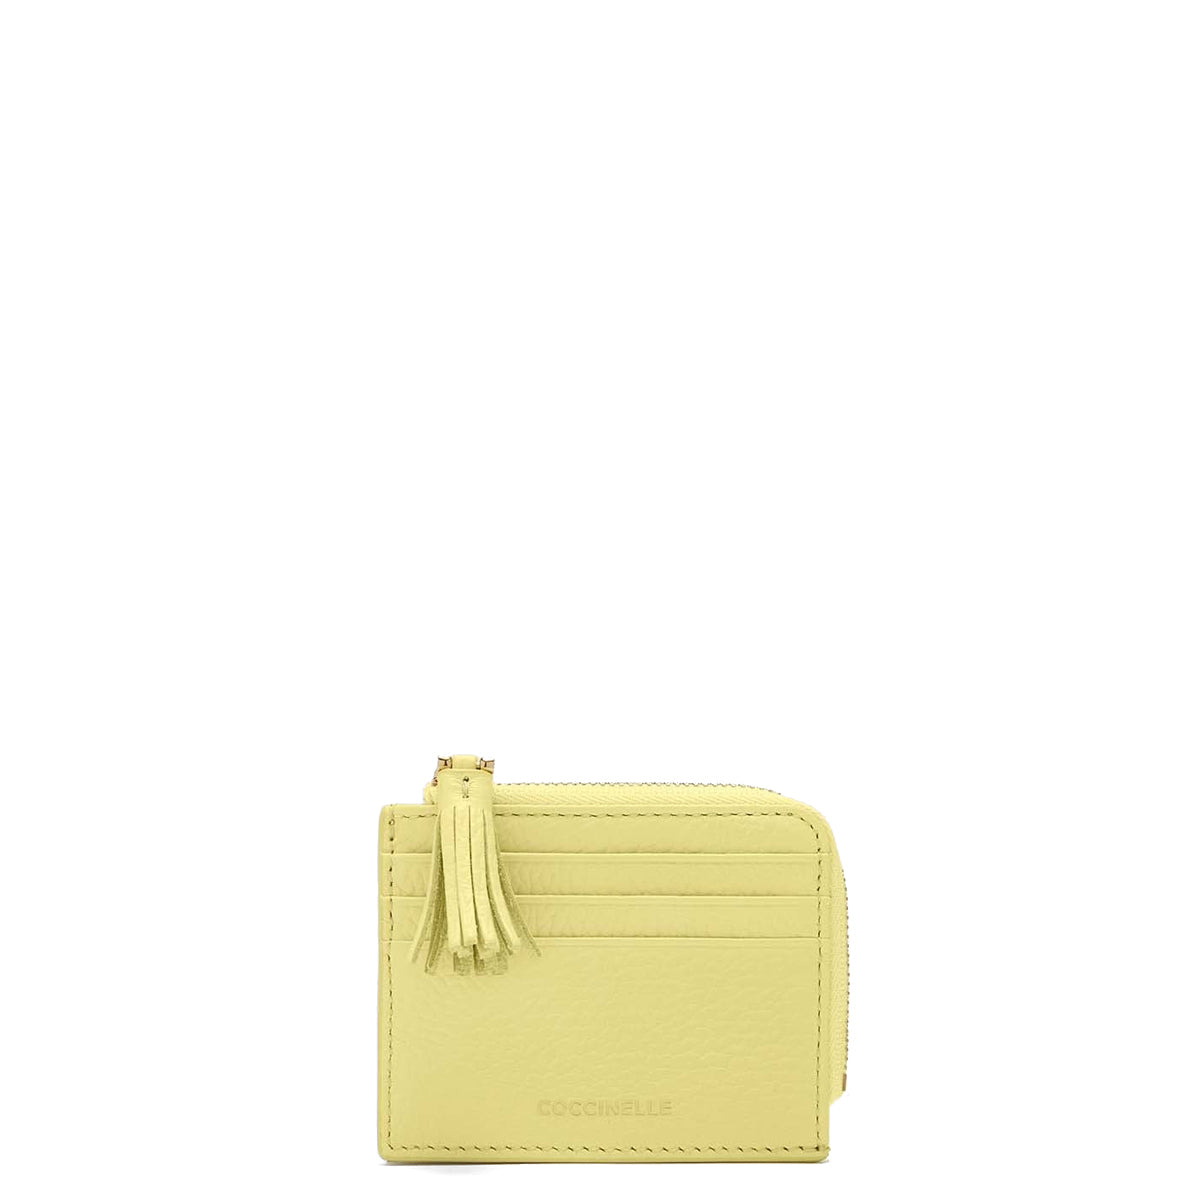 Coccinelle - Card Holder with Tassel Lime Wash - MU0128901 - LIME/WASH